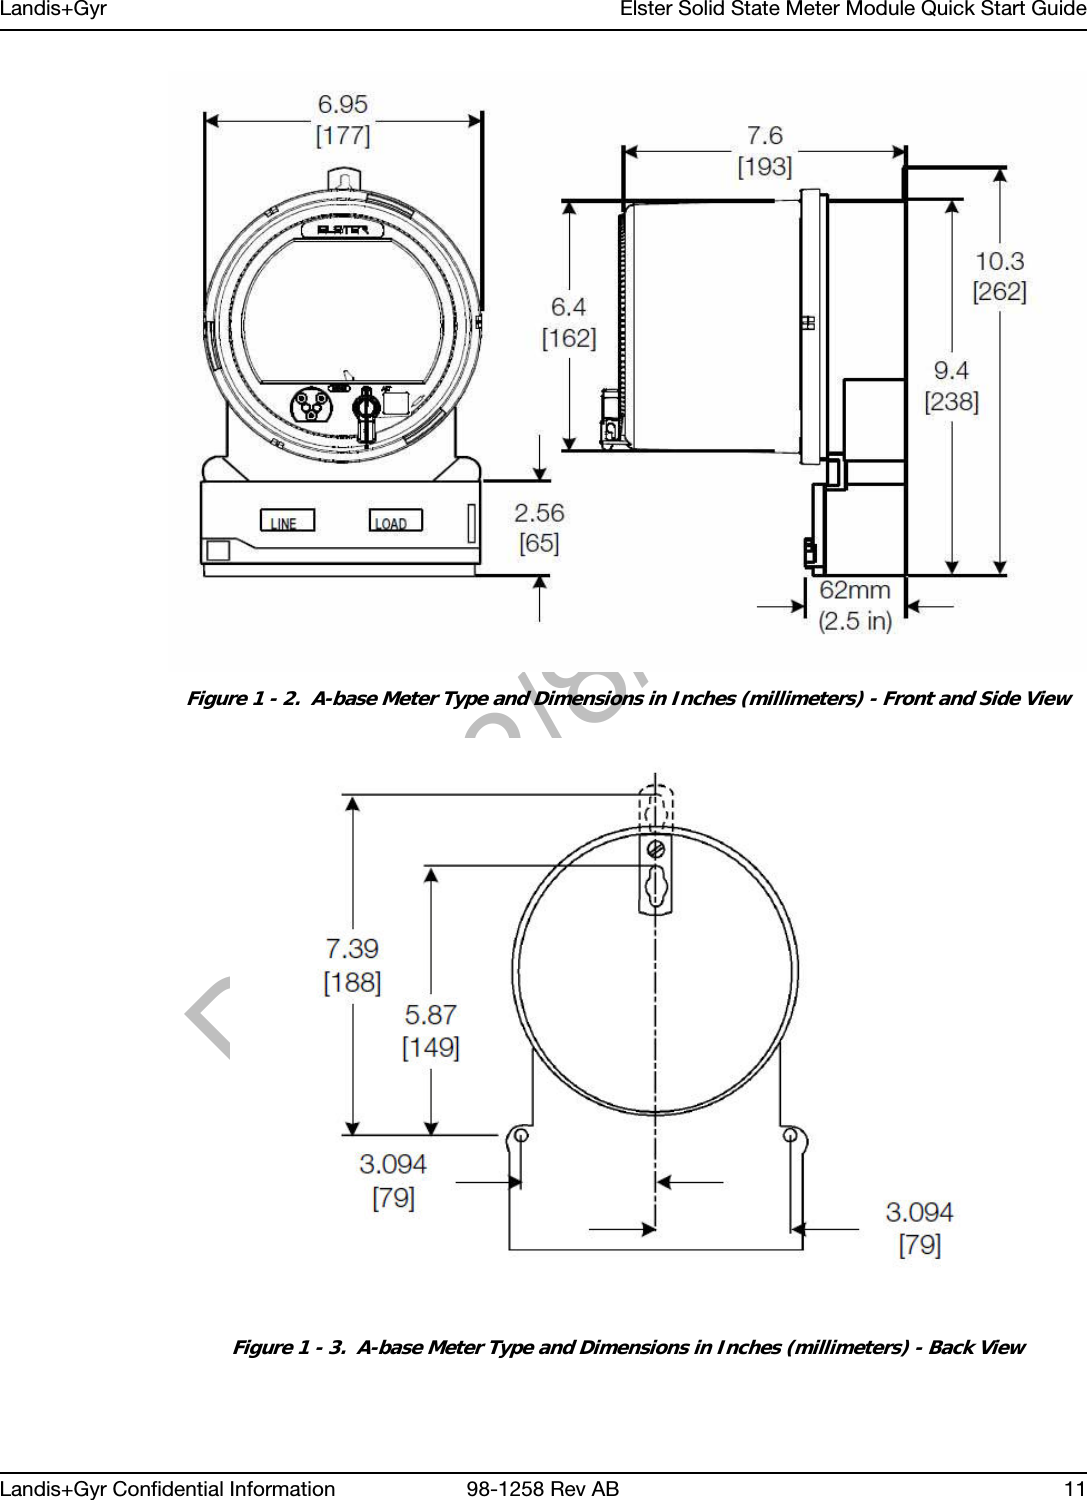 Draft 12/8/2012Landis+Gyr Elster Solid State Meter Module Quick Start GuideLandis+Gyr Confidential Information 98-1258 Rev AB 11Figure 1 - 2.  A-base Meter Type and Dimensions in Inches (millimeters) - Front and Side ViewFigure 1 - 3.  A-base Meter Type and Dimensions in Inches (millimeters) - Back View